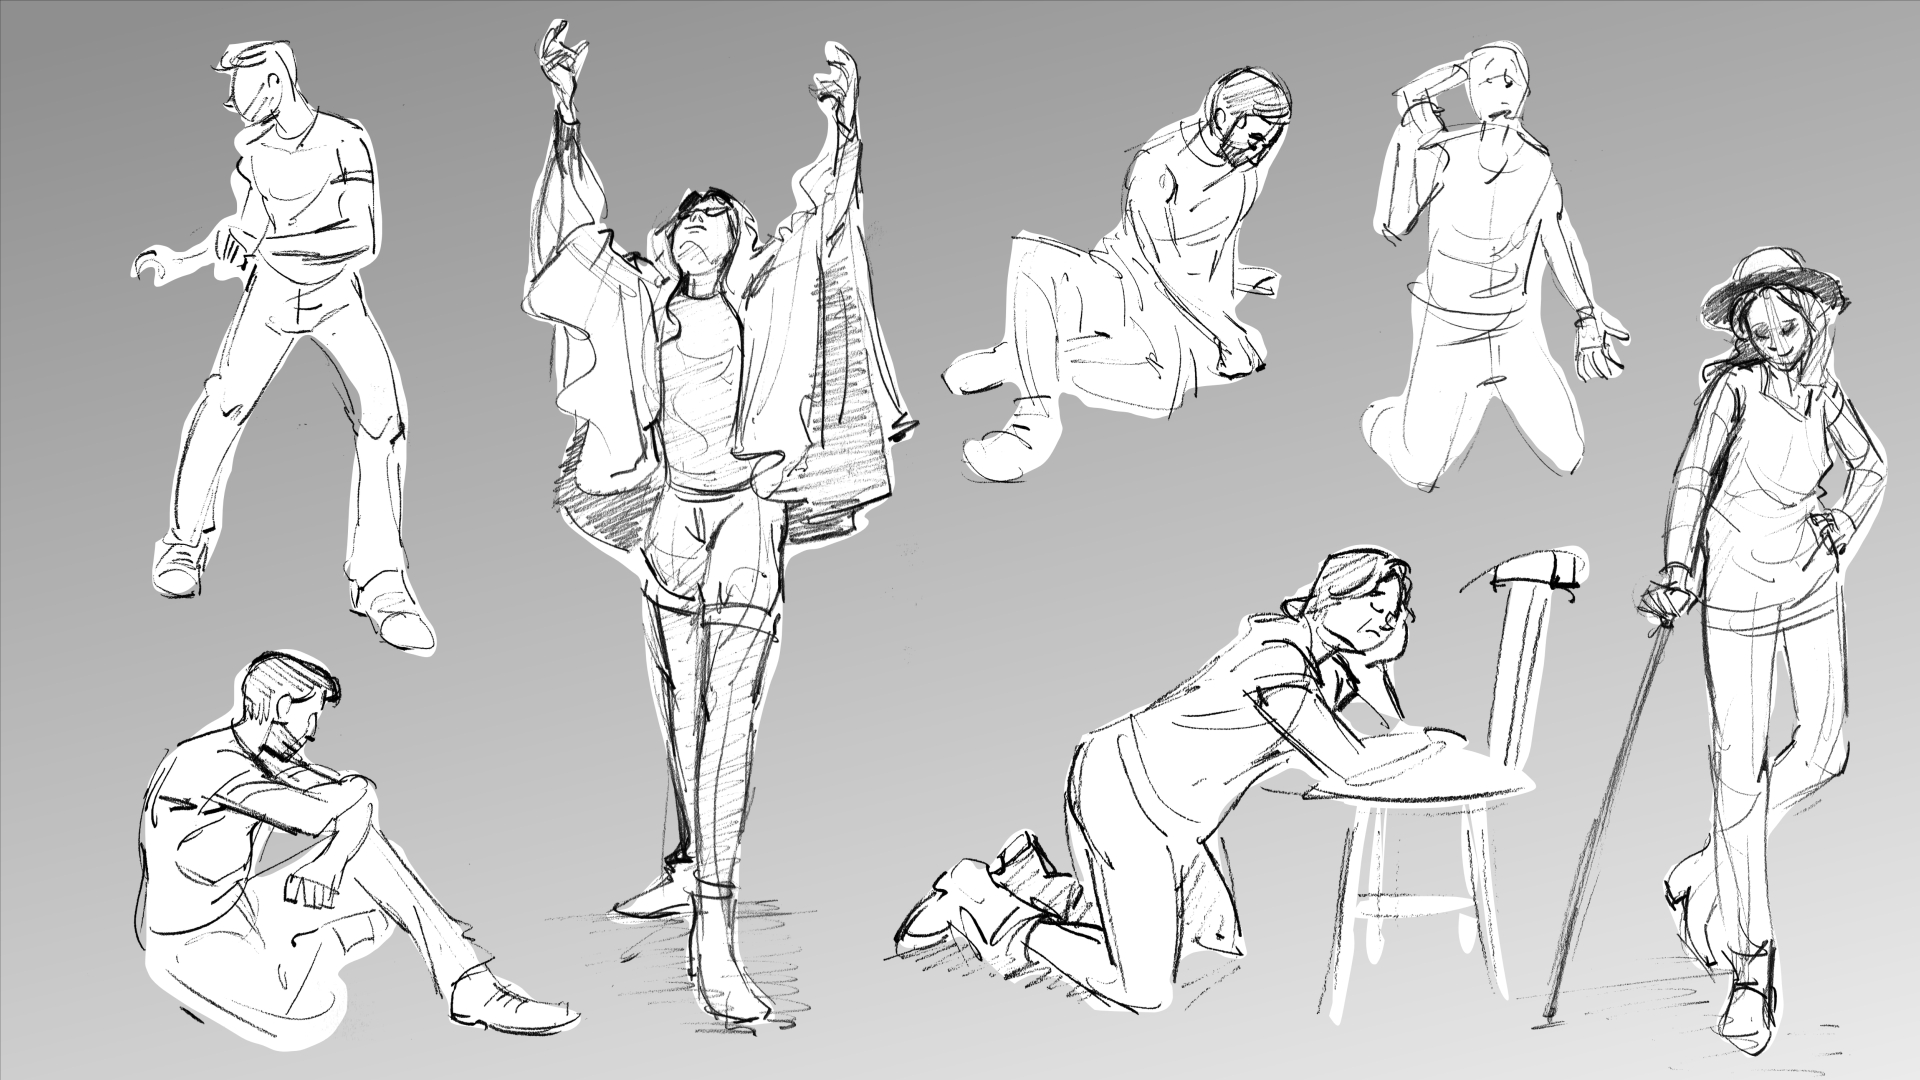 Lifedrawing - 30 sec to 5 min